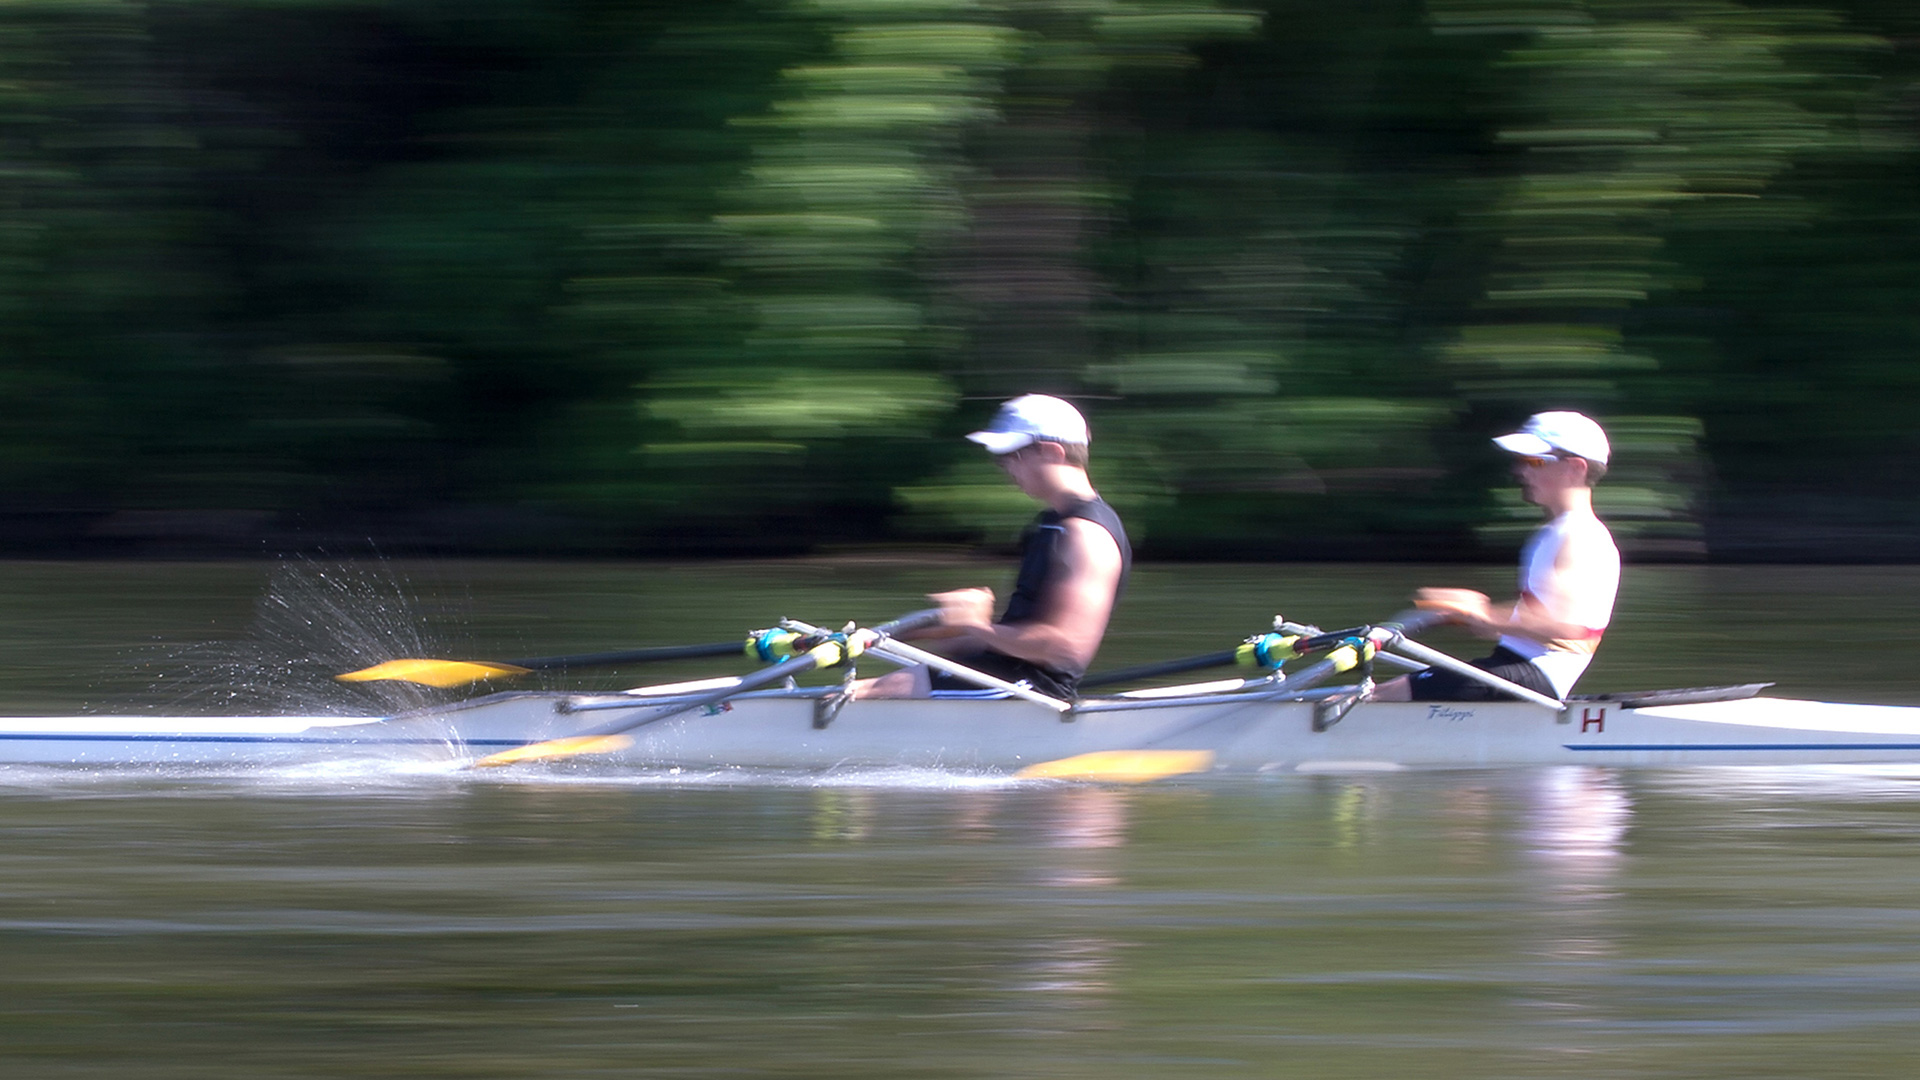 Stratus image of rowers on river from website